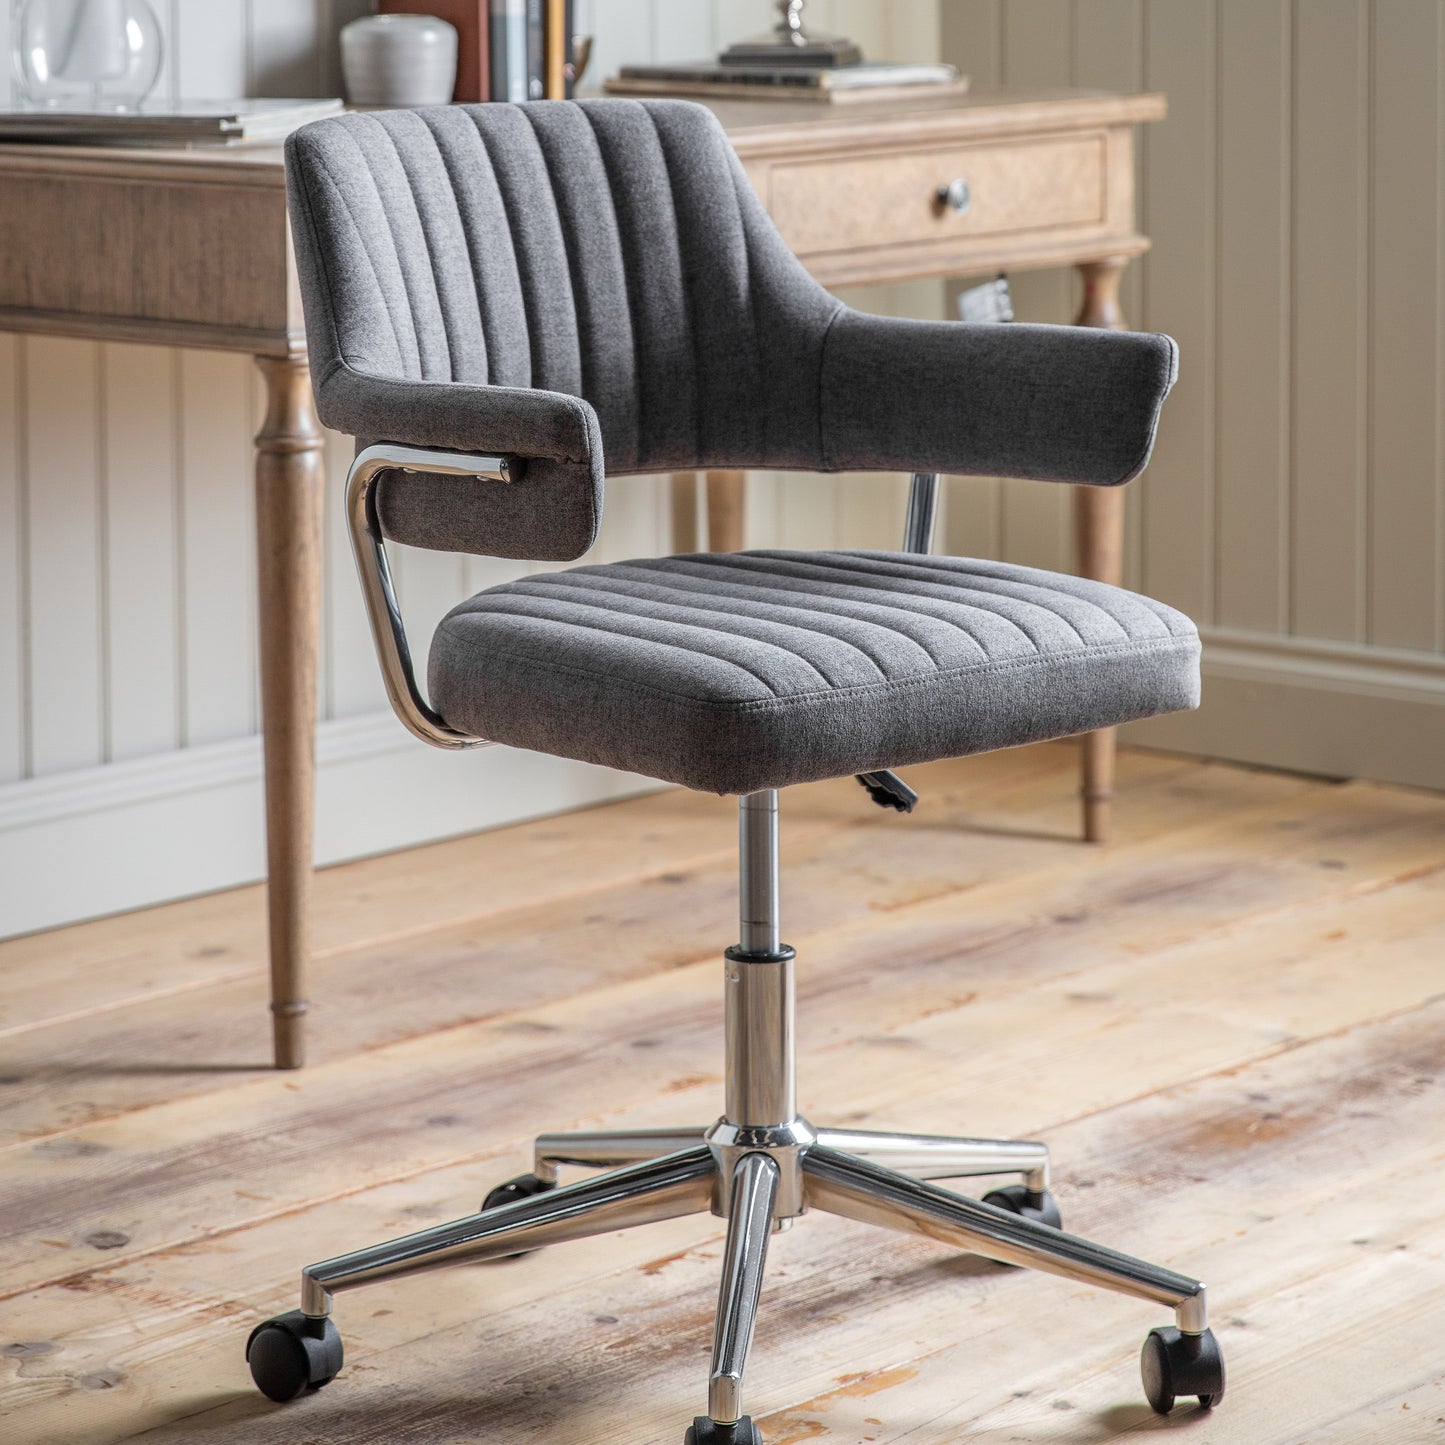 A Mcintyre Swivel Chair Charcoal from Kikiathome.co.uk on casters in front of a wooden floor, perfect for home furniture and interior decor.